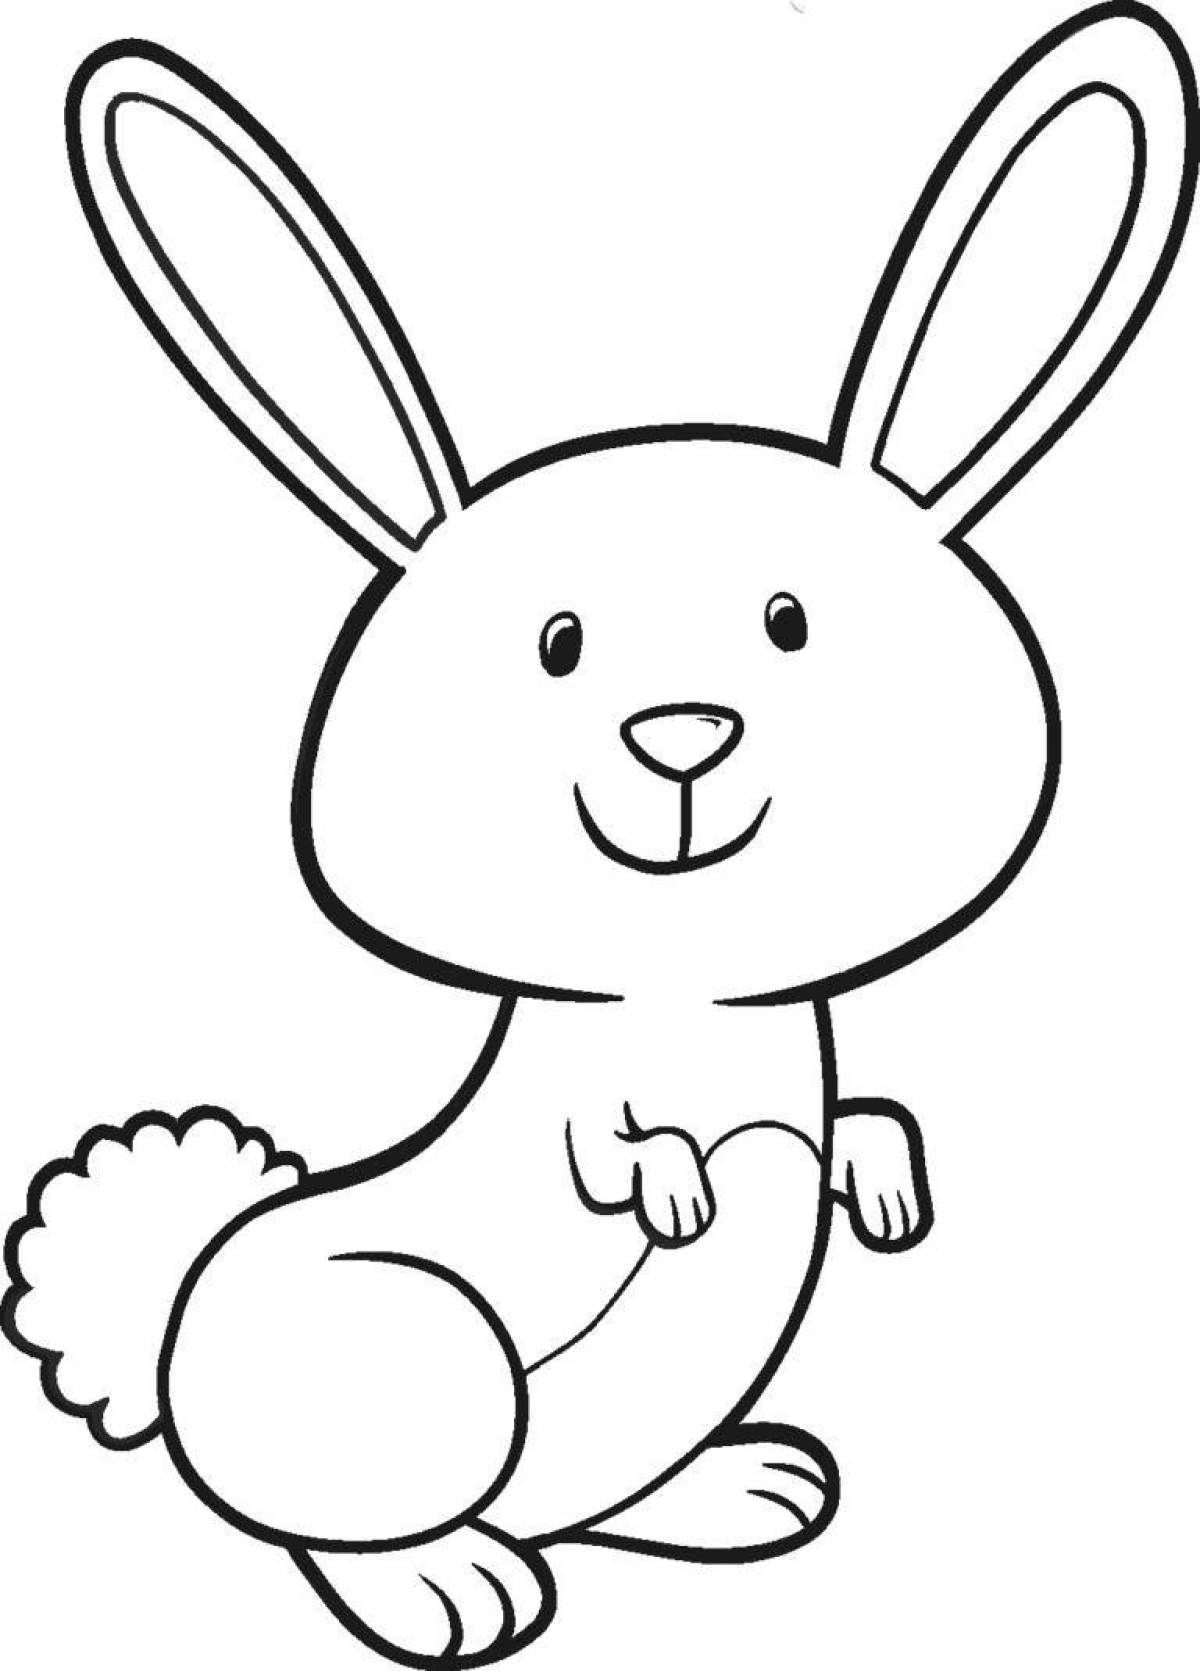 Cute bunny coloring pages for kids